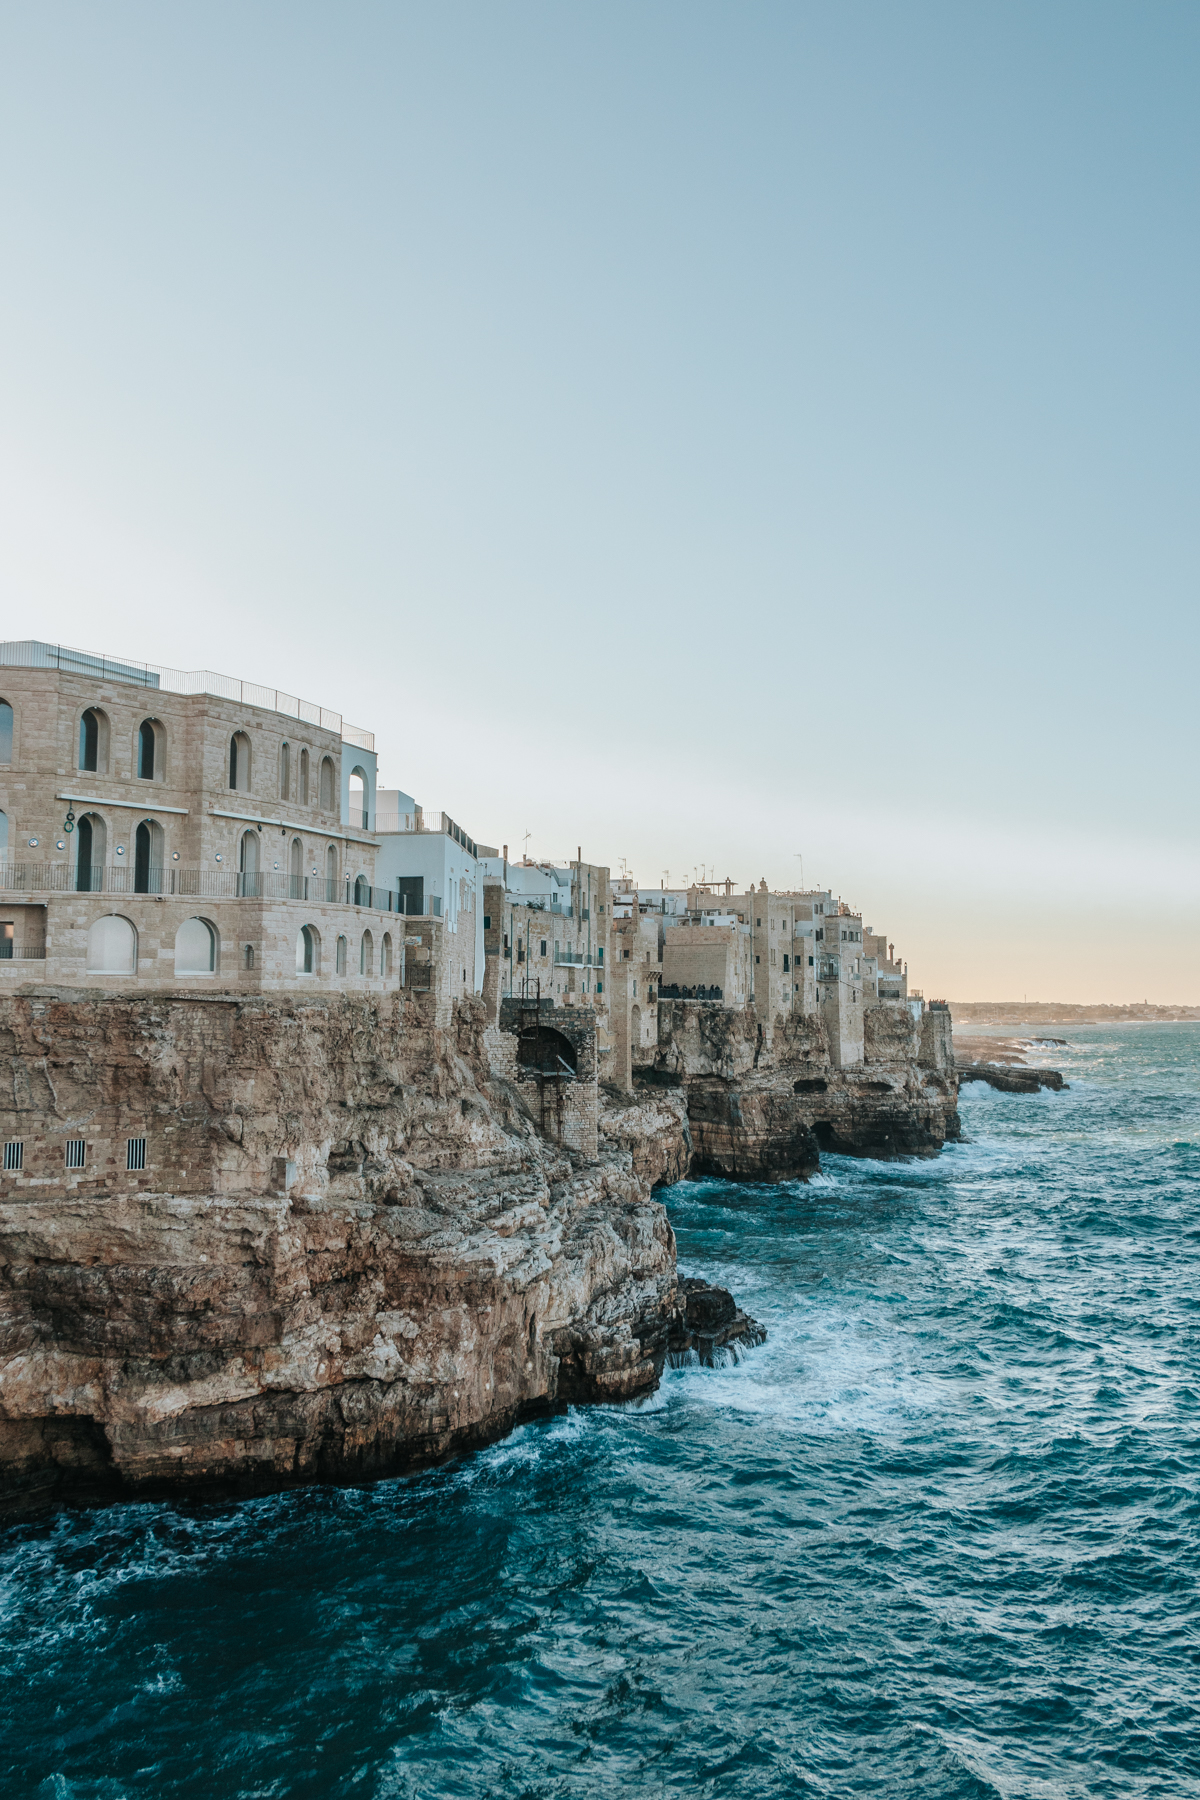 Polignano a Mare: Why It’s Worth Visiting And The Perfect One Day Itinerary